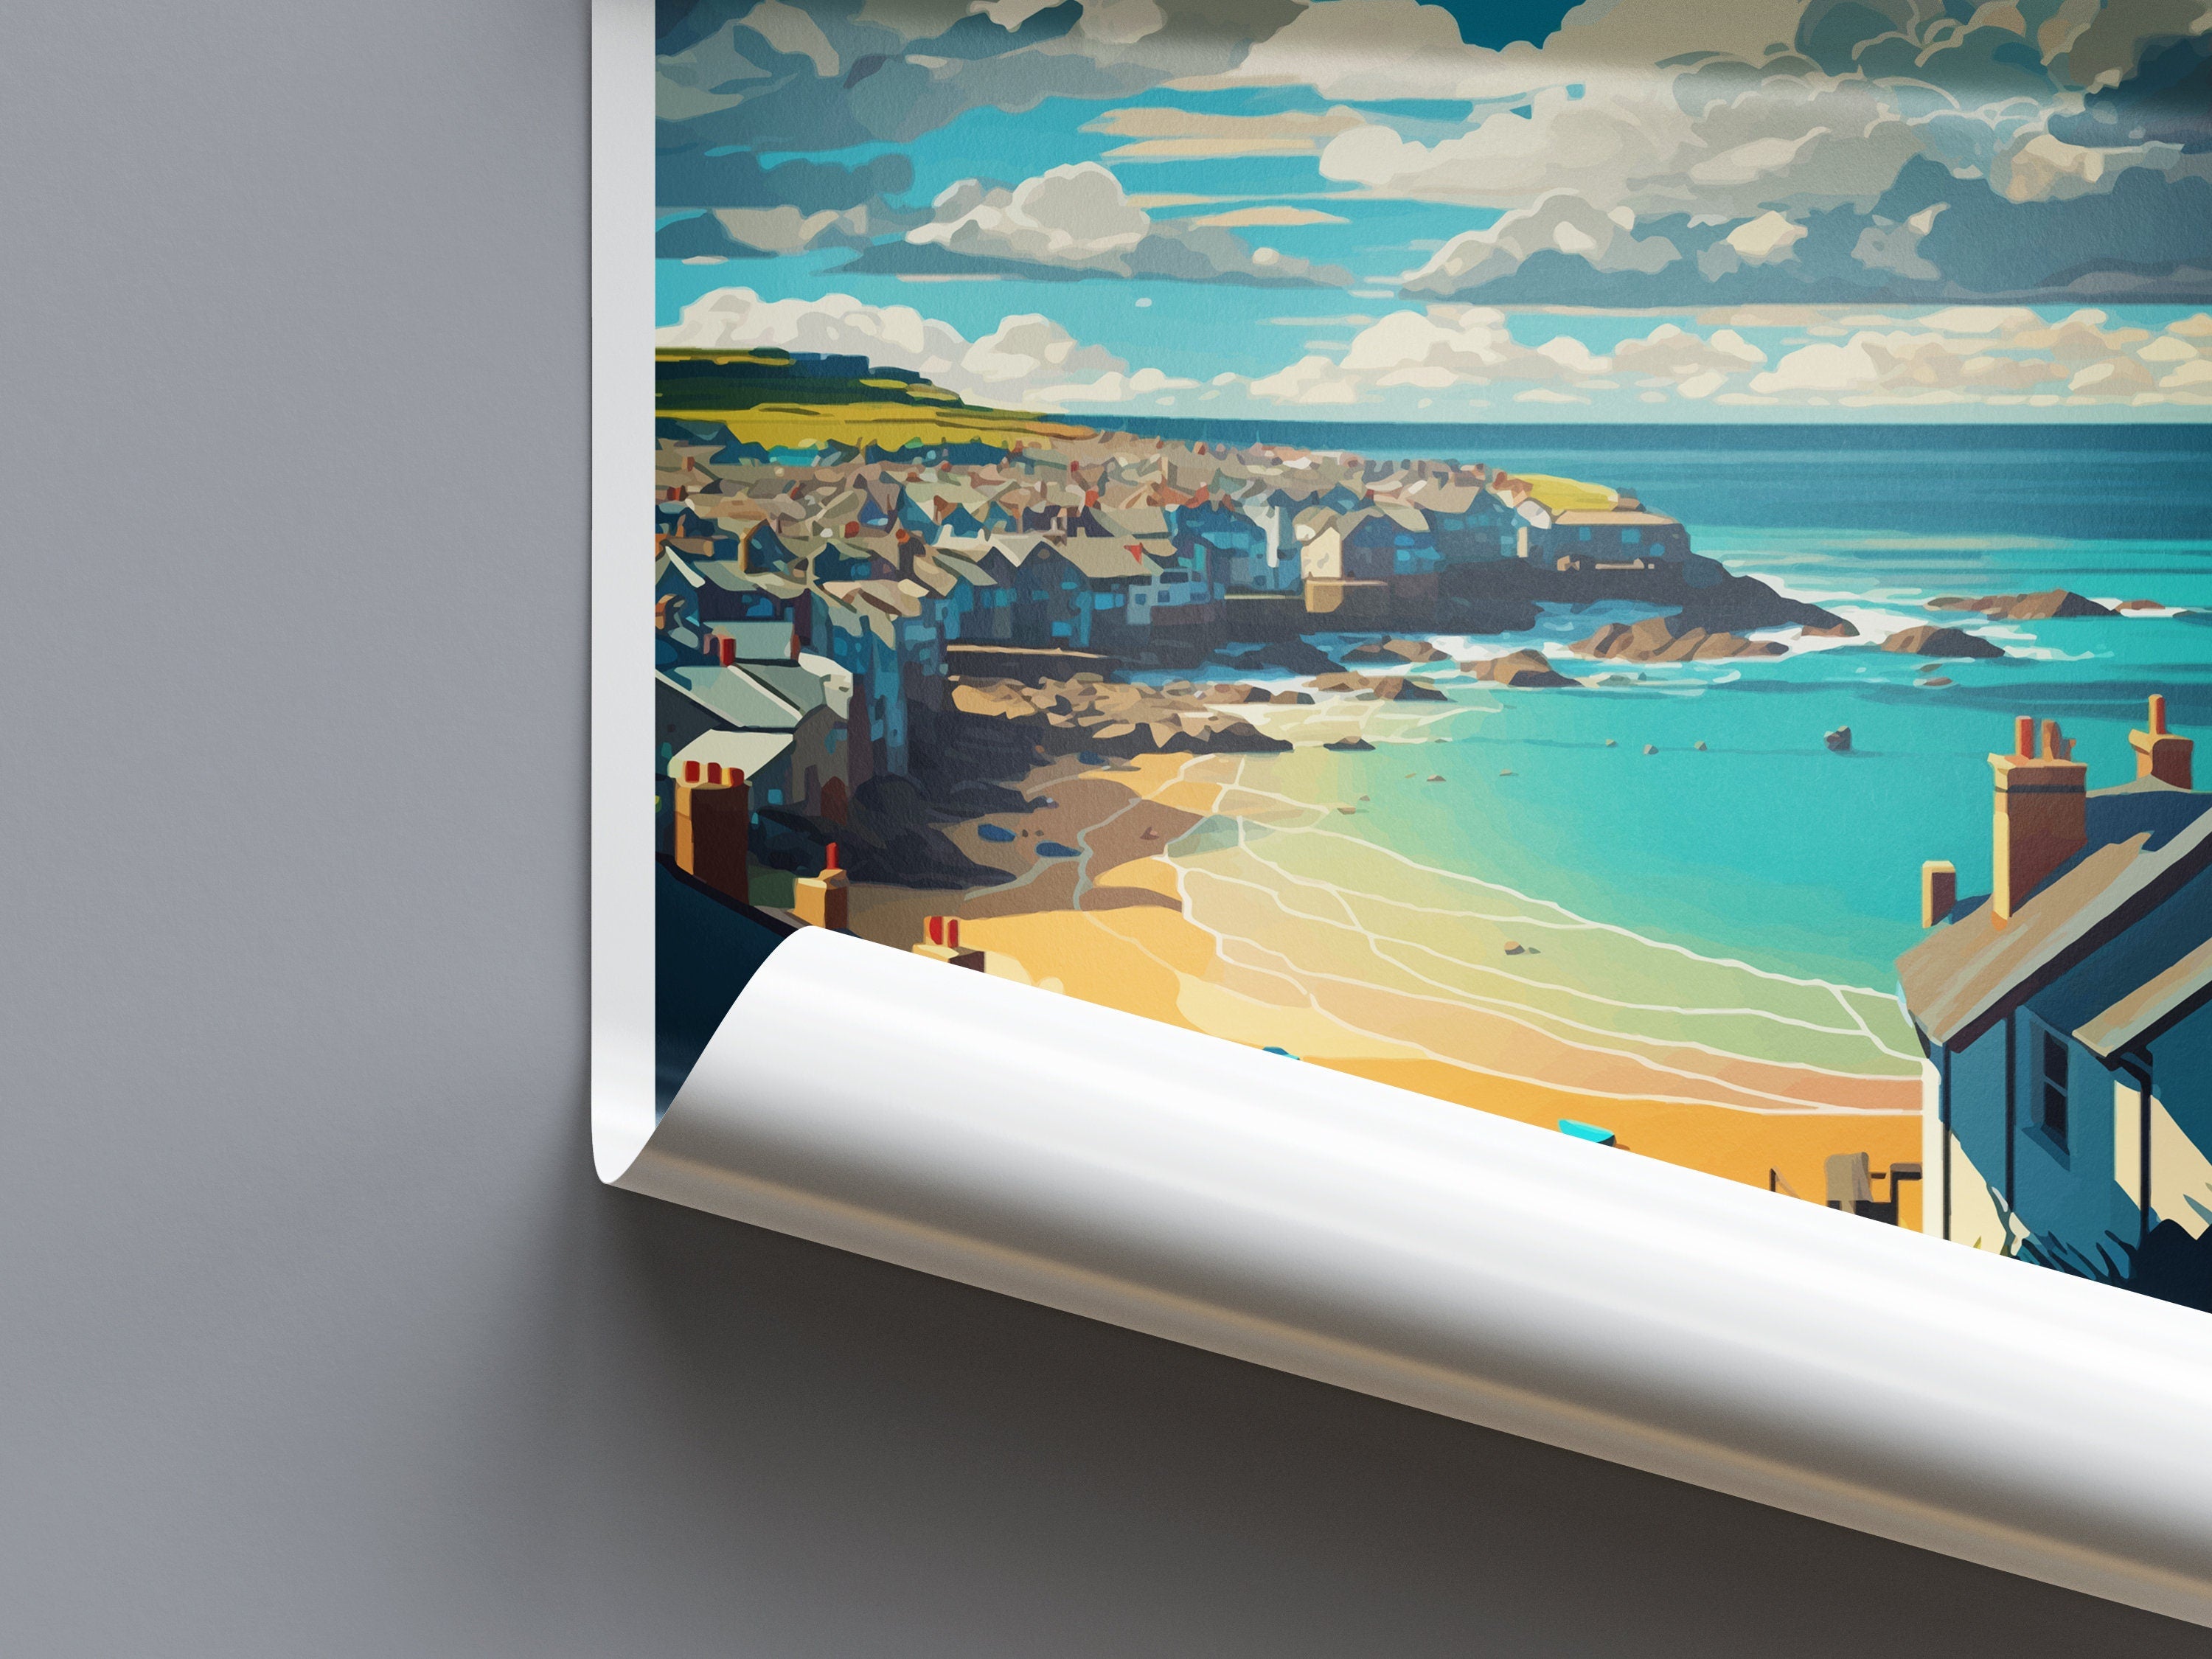 St Ives Travel Print Wall Art St Ives Wall Hanging Home Décor St Ives Gift Art Lovers England Art Lover Gift St Ives Travel Souvenir